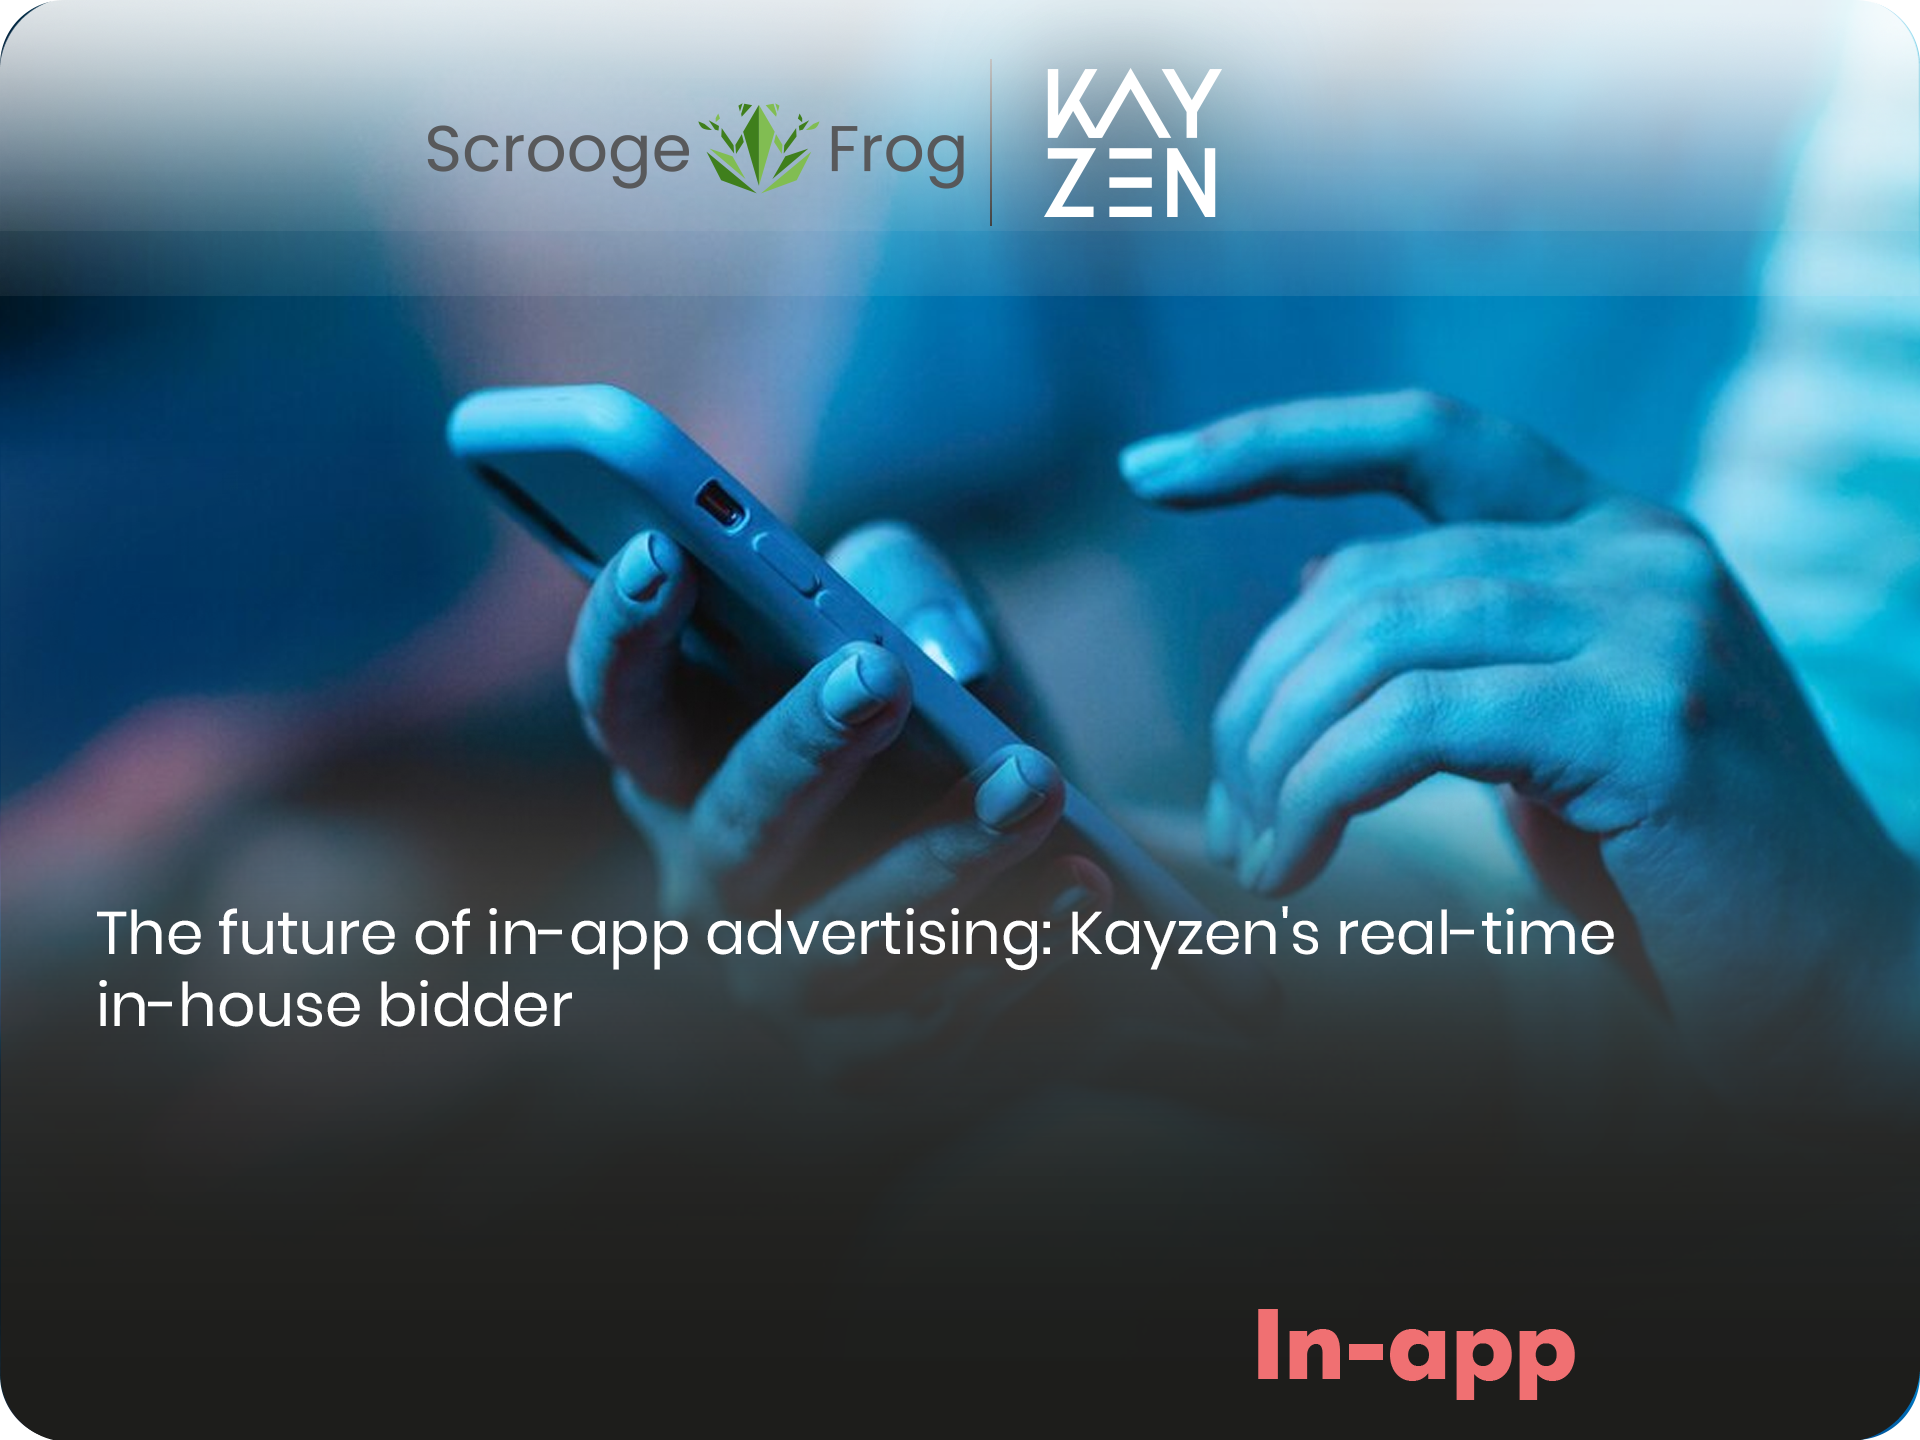 The future of in-app advertising: Kayzen’s real-time in-house bidder